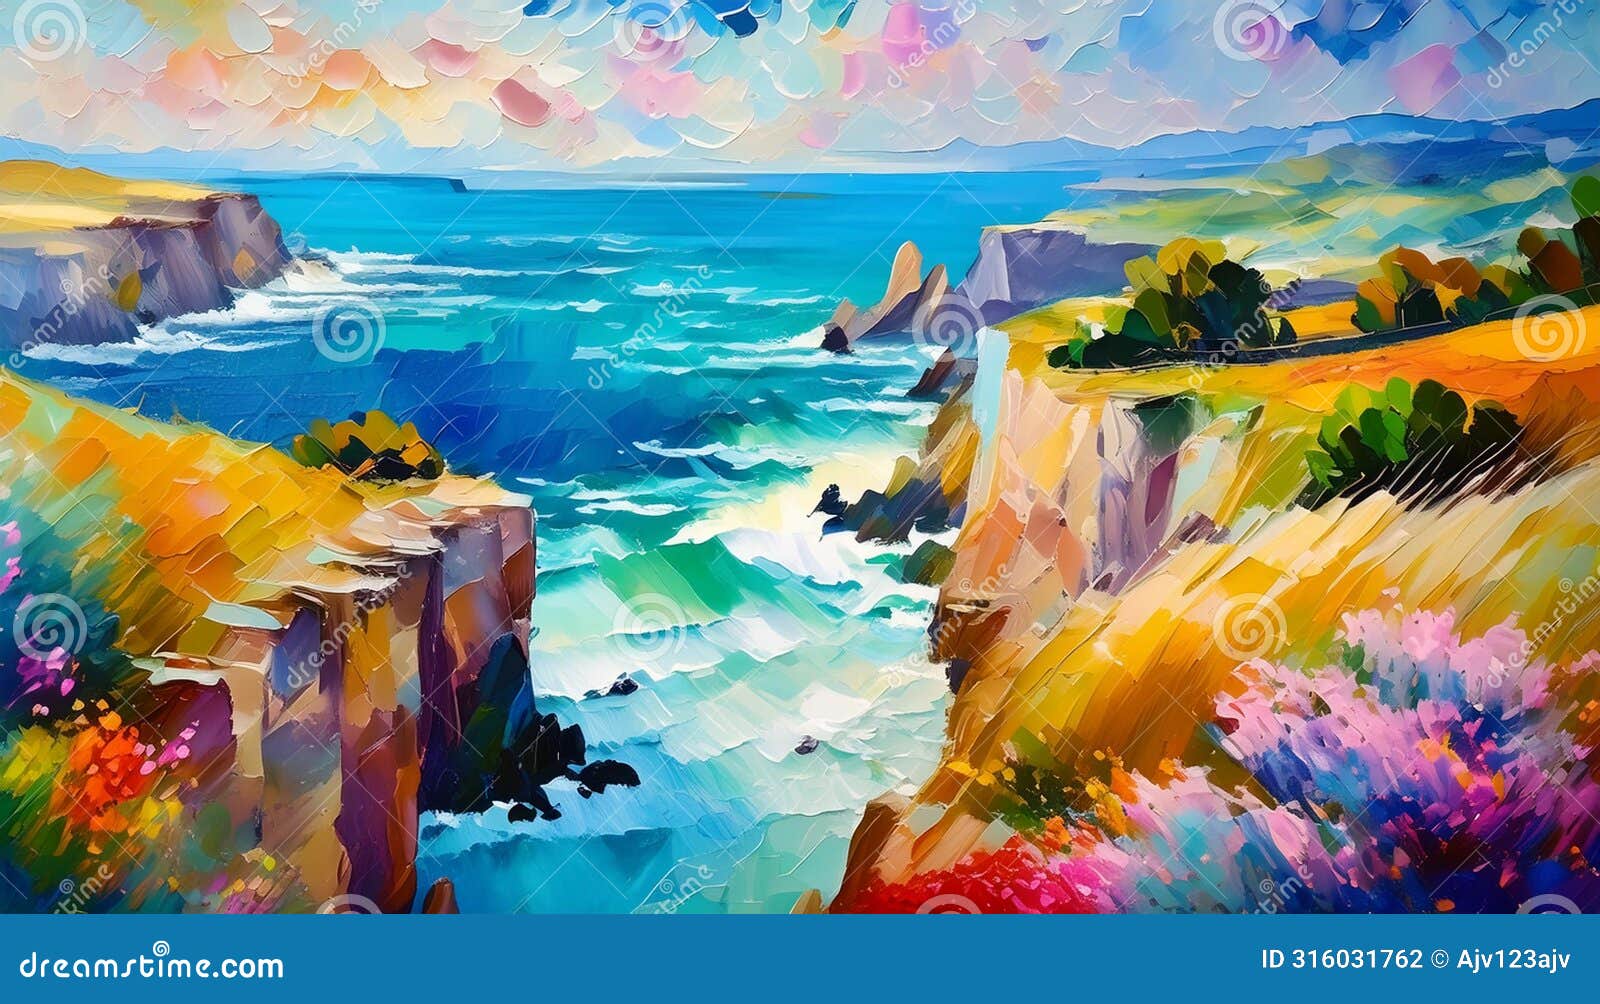 an impressionist oil painting style image of a seaside landscape